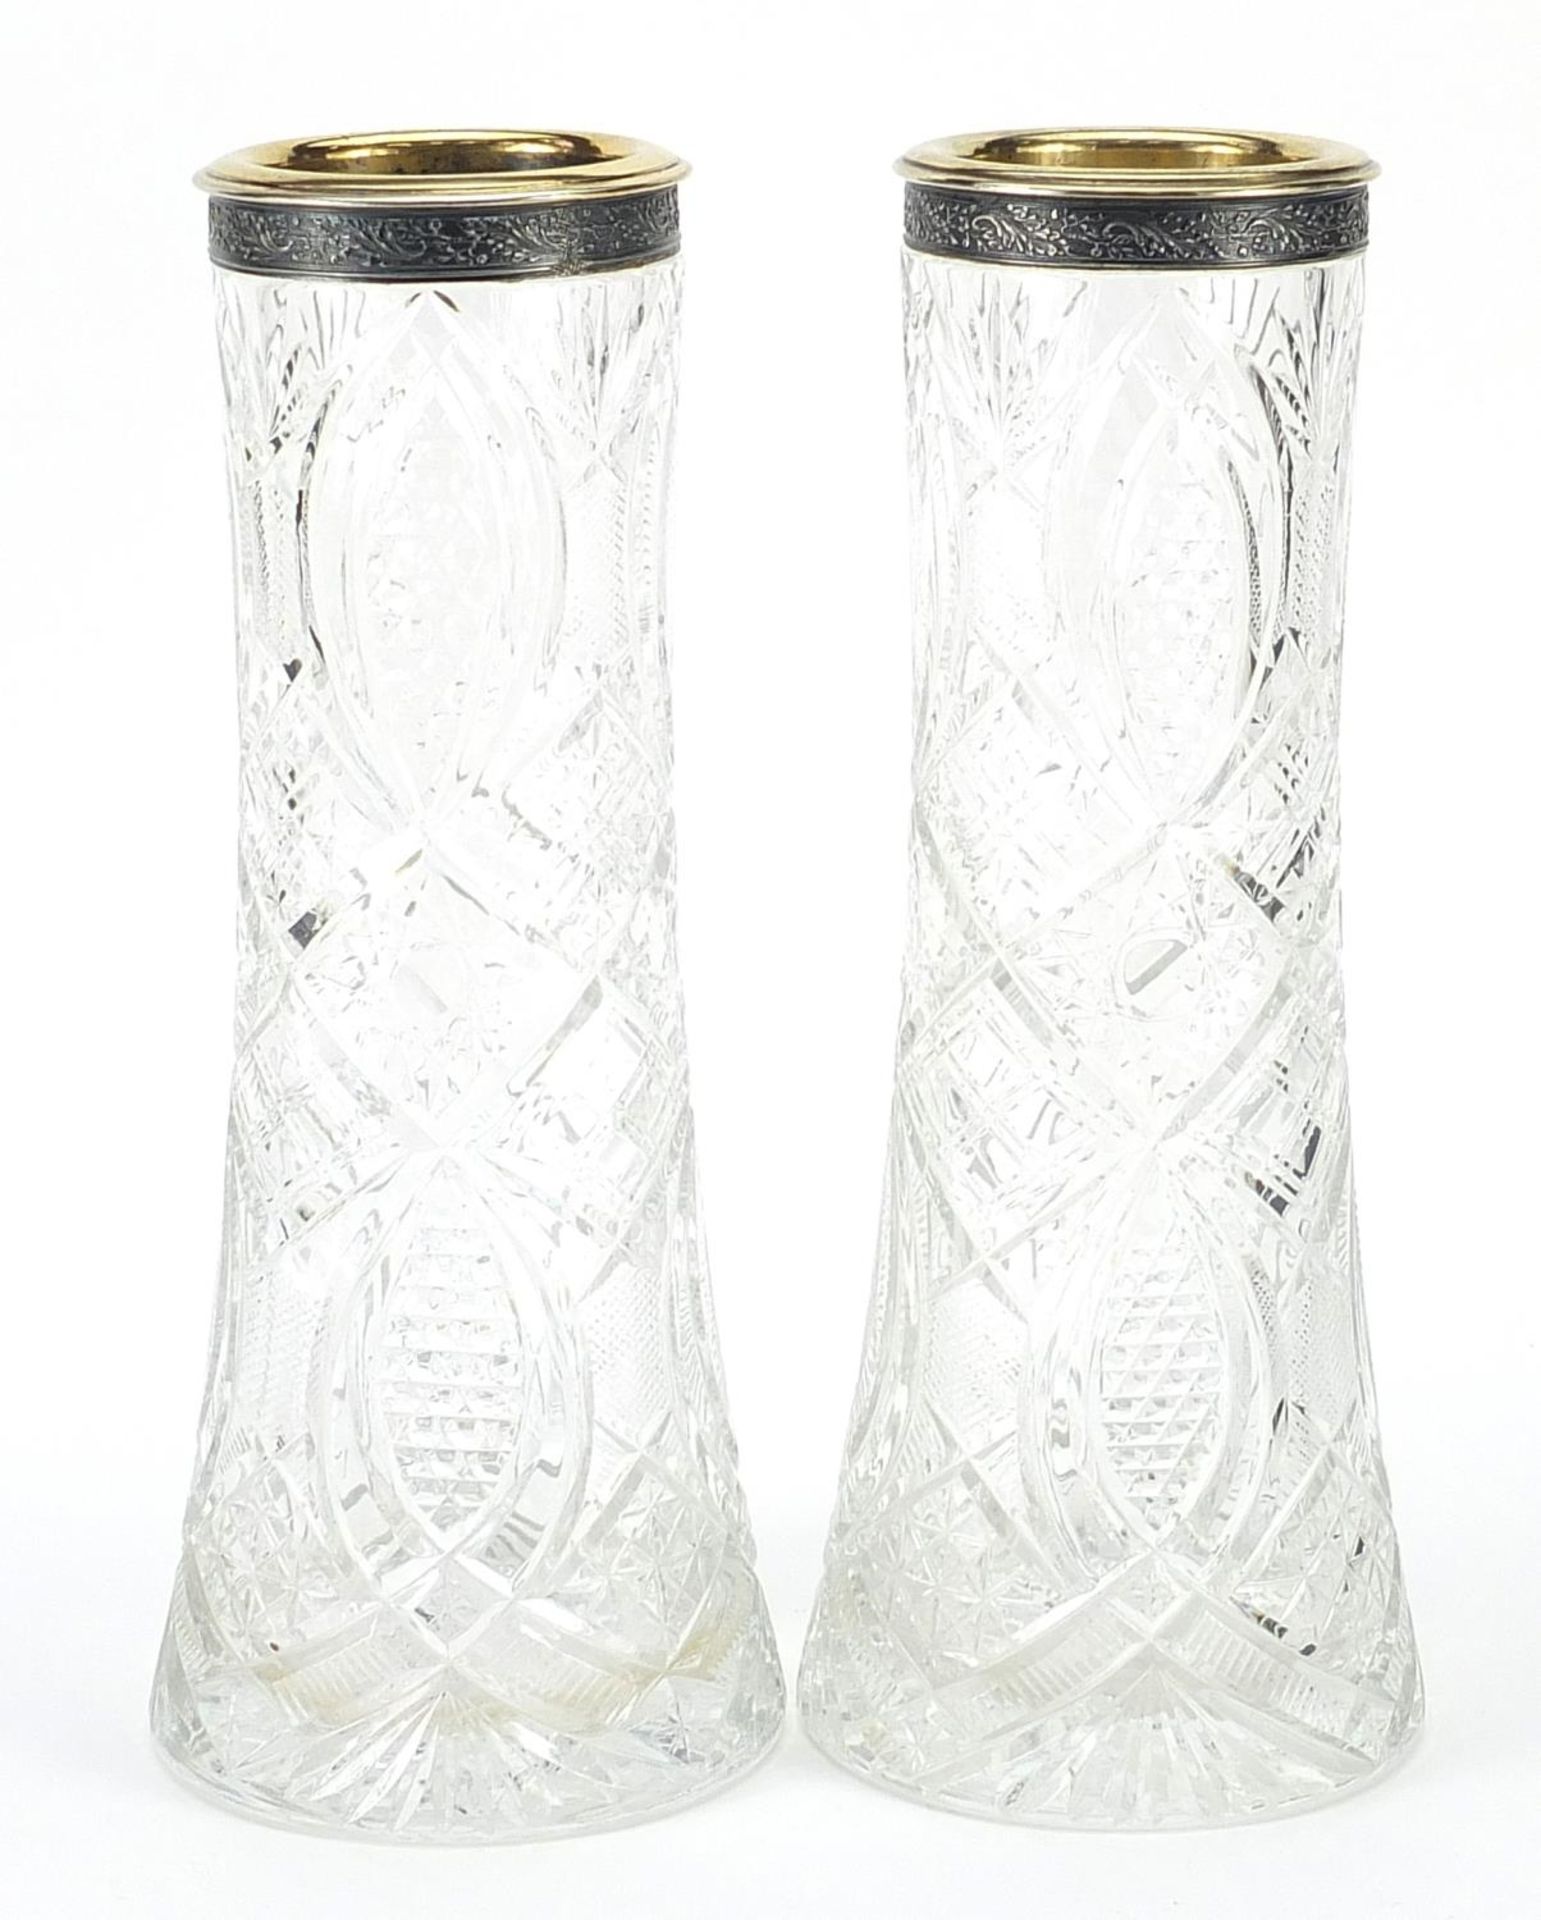 Russian cut vases with silver collars, impressed Russian marks 2MO 875 with hammer and sickle, 28. - Image 2 of 5